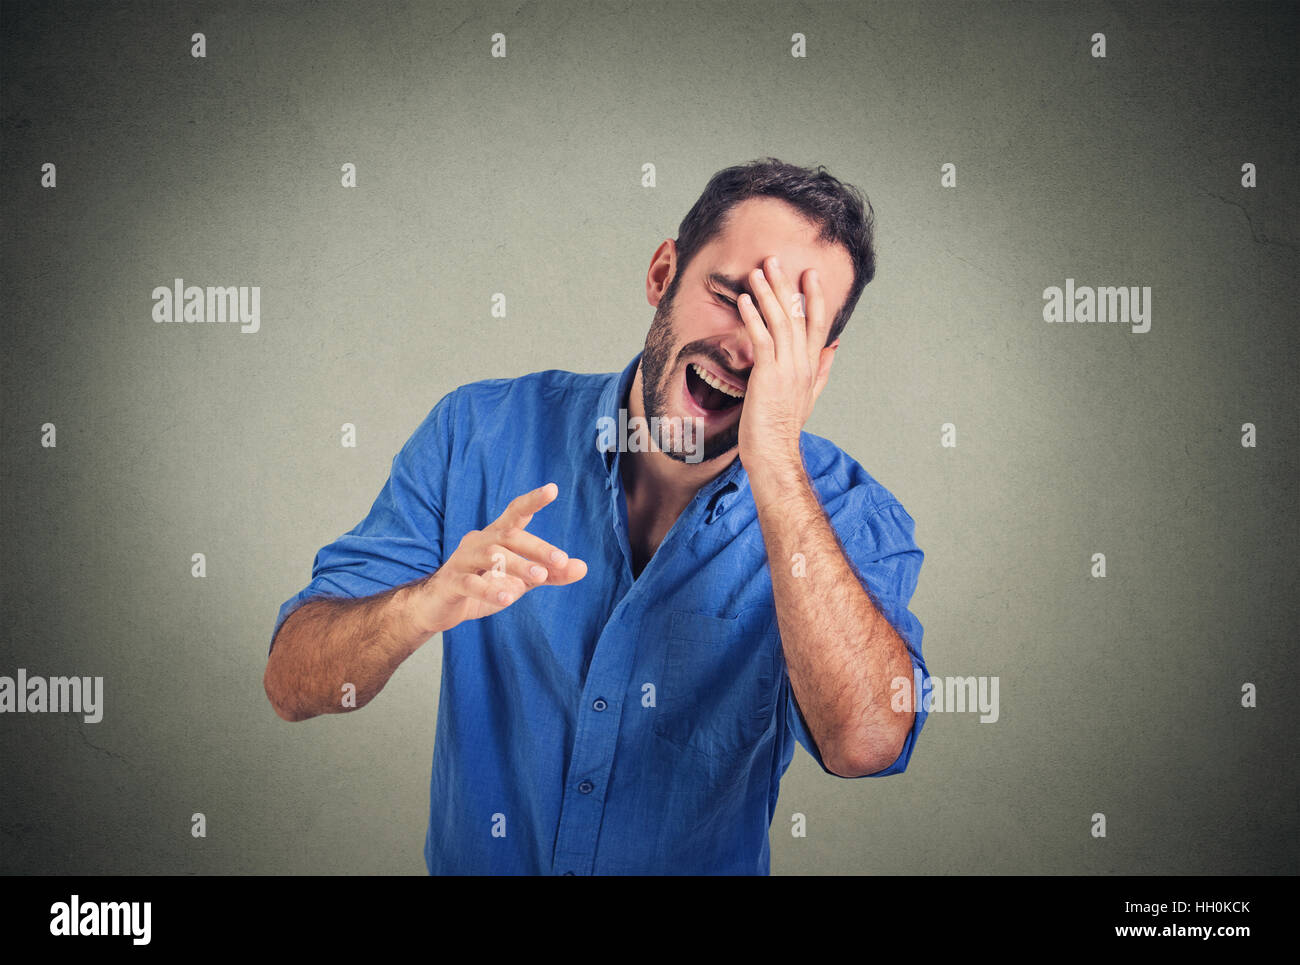 Laughing young man Stock Photo